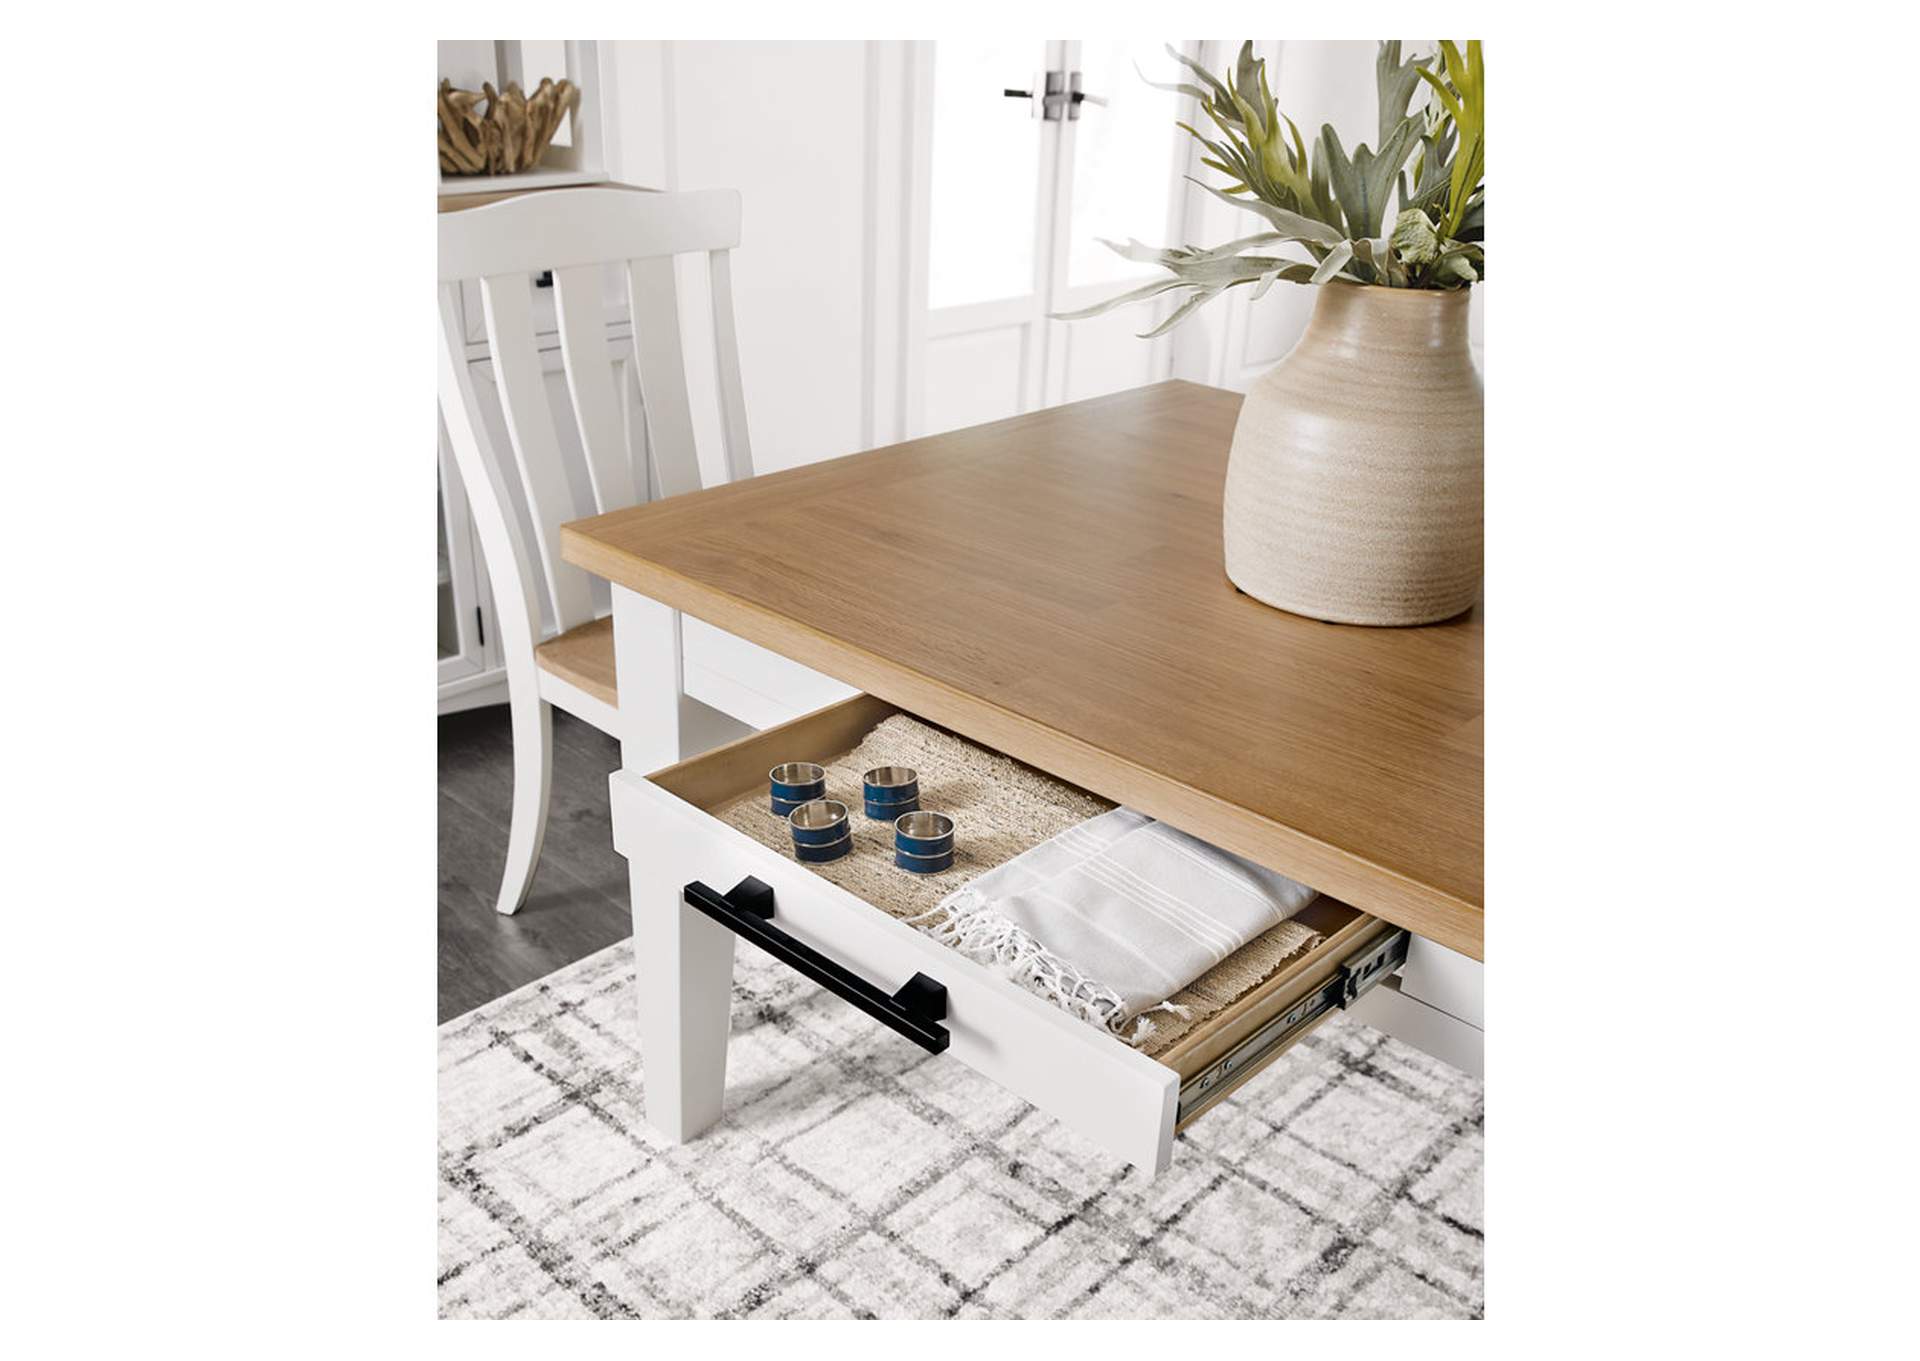 Ashbryn Dining Table and 2 Chairs and Bench,Signature Design By Ashley